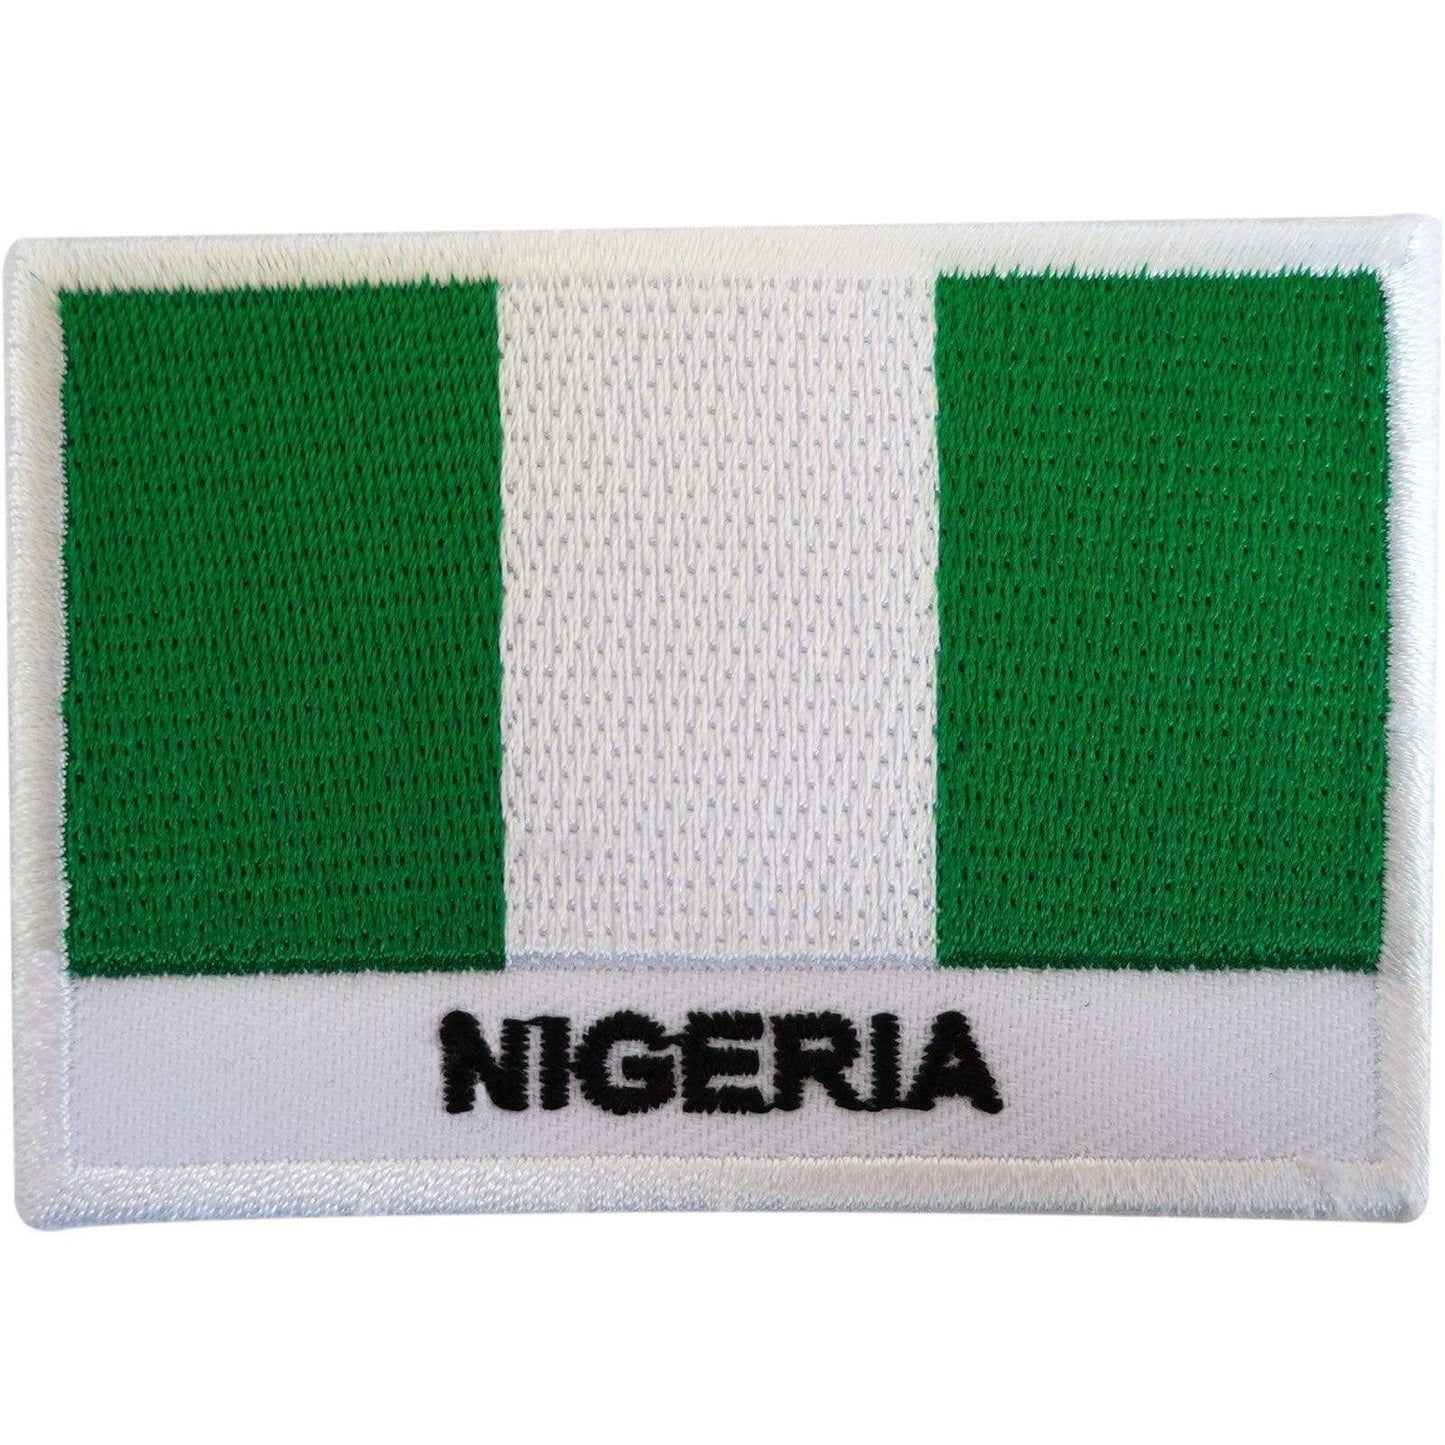 Embroidered Nigeria Flag Patch Badge Iron Sew On T Shirt Bag West Africa Abuja